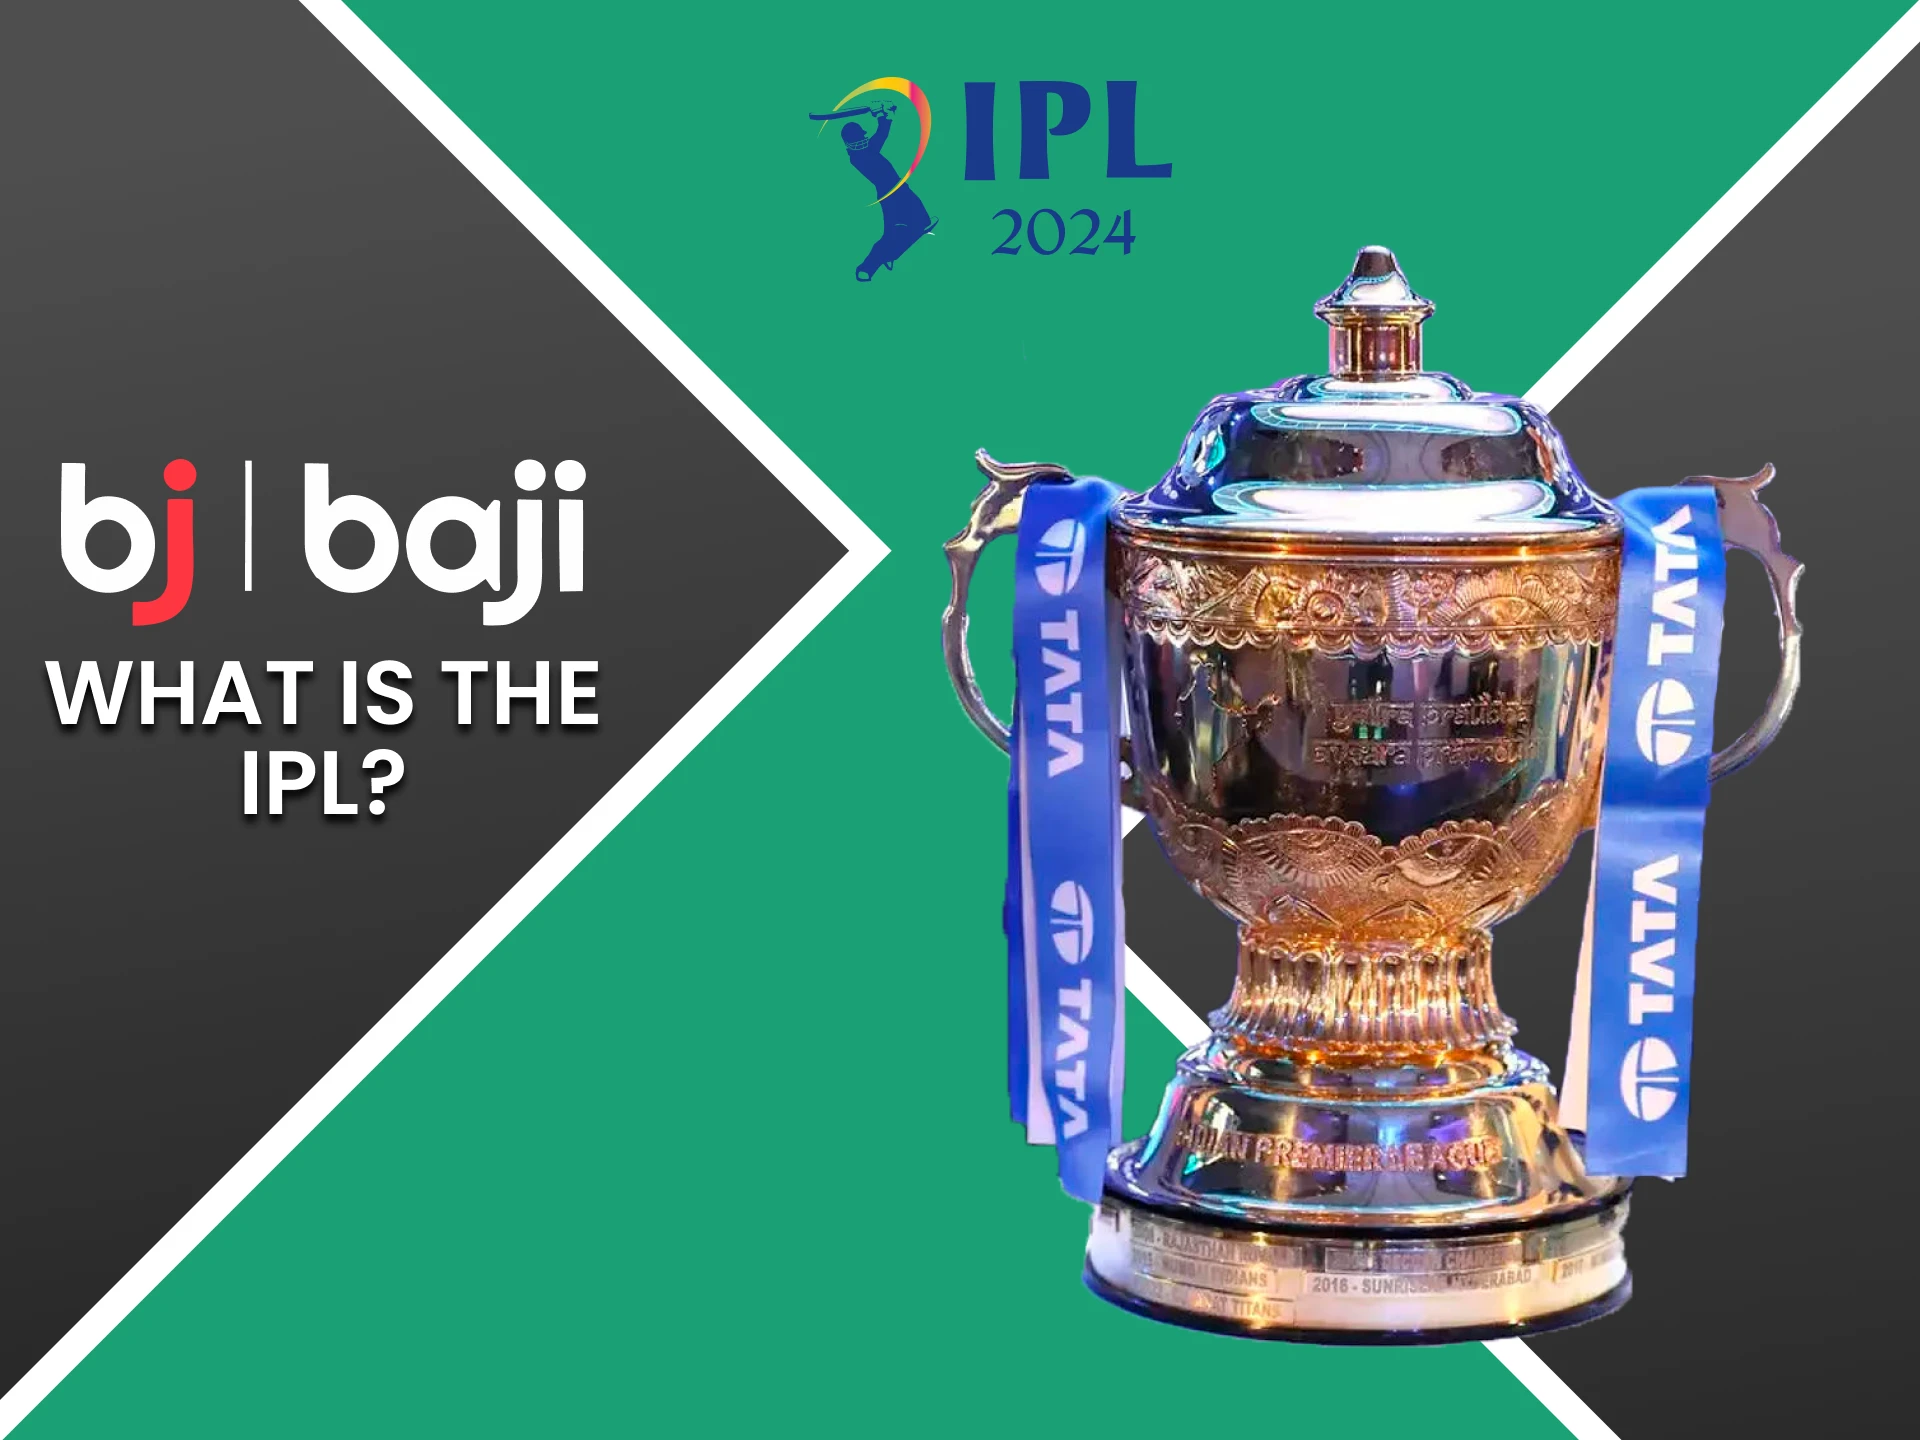 We will cover the IPL league on Baji.